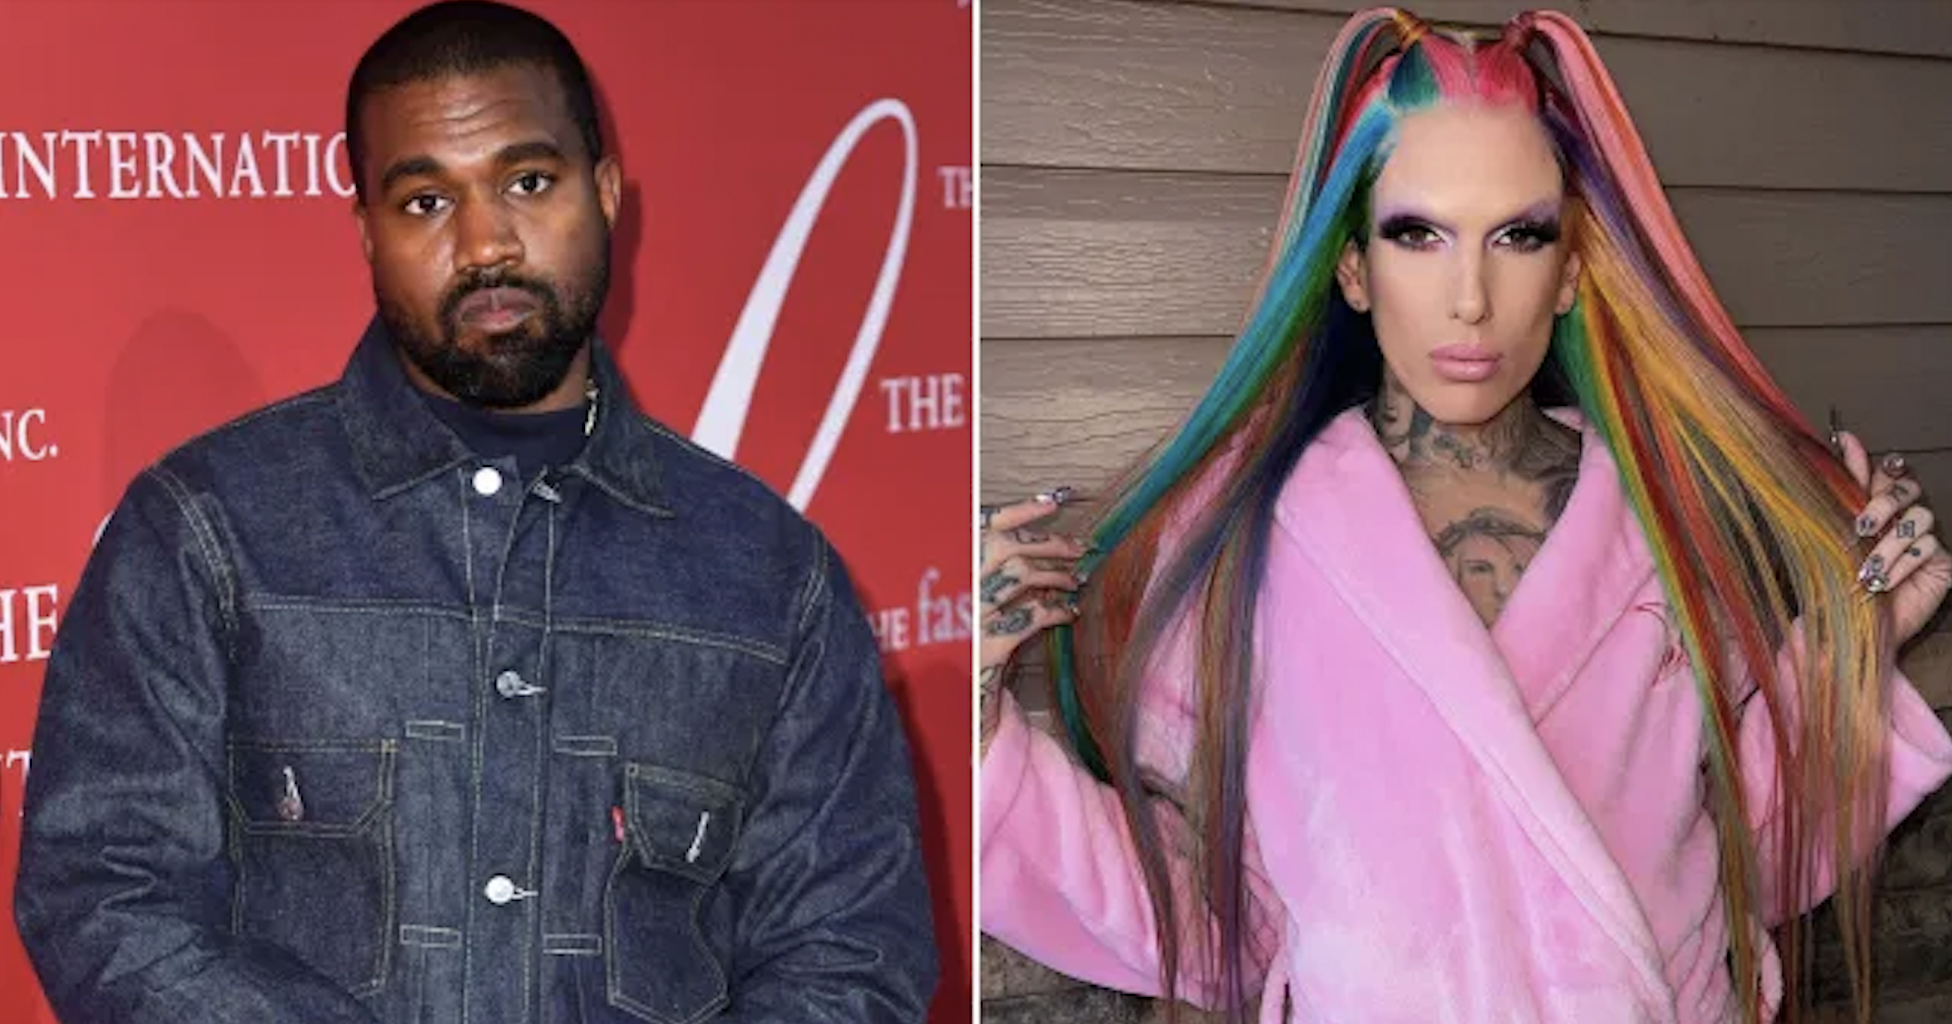 Bizarre_Rumor_Alleges_Kanye_West_Hooked_Up_With_Jeffree_Star